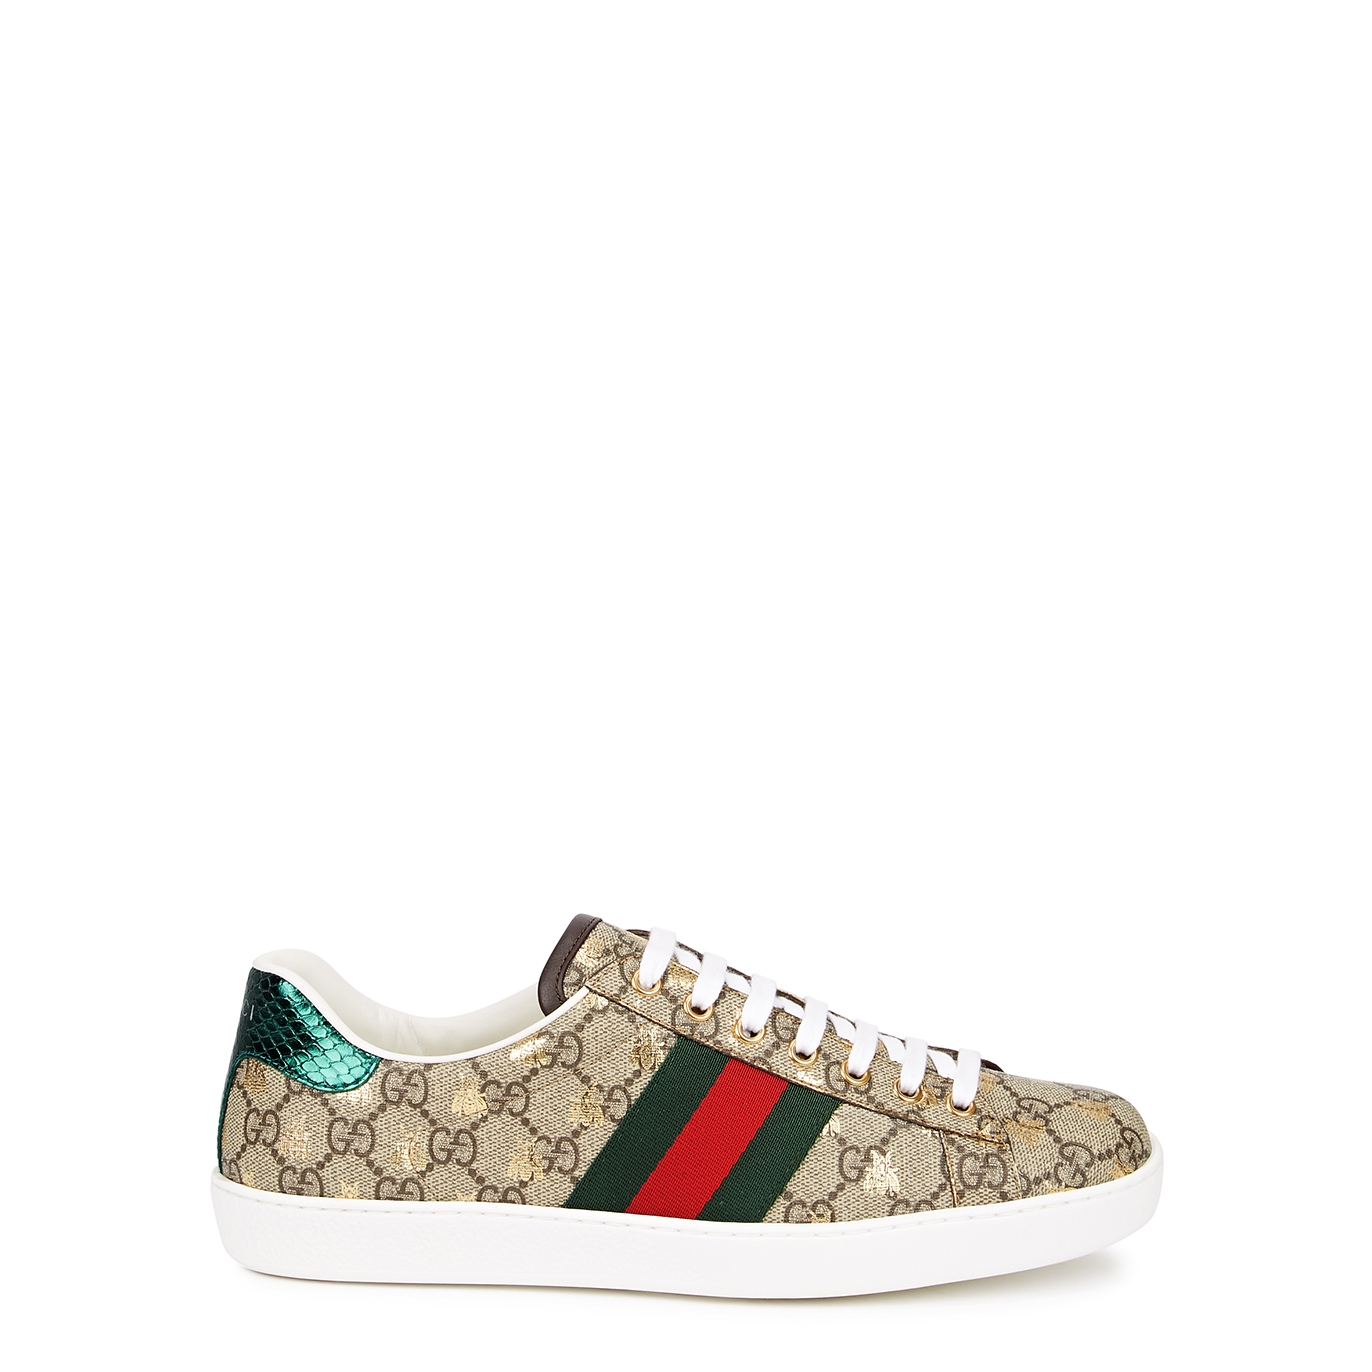 Gucci Ace GG Supreme Bee-print Monogrammed Sneakers - Beige - 6